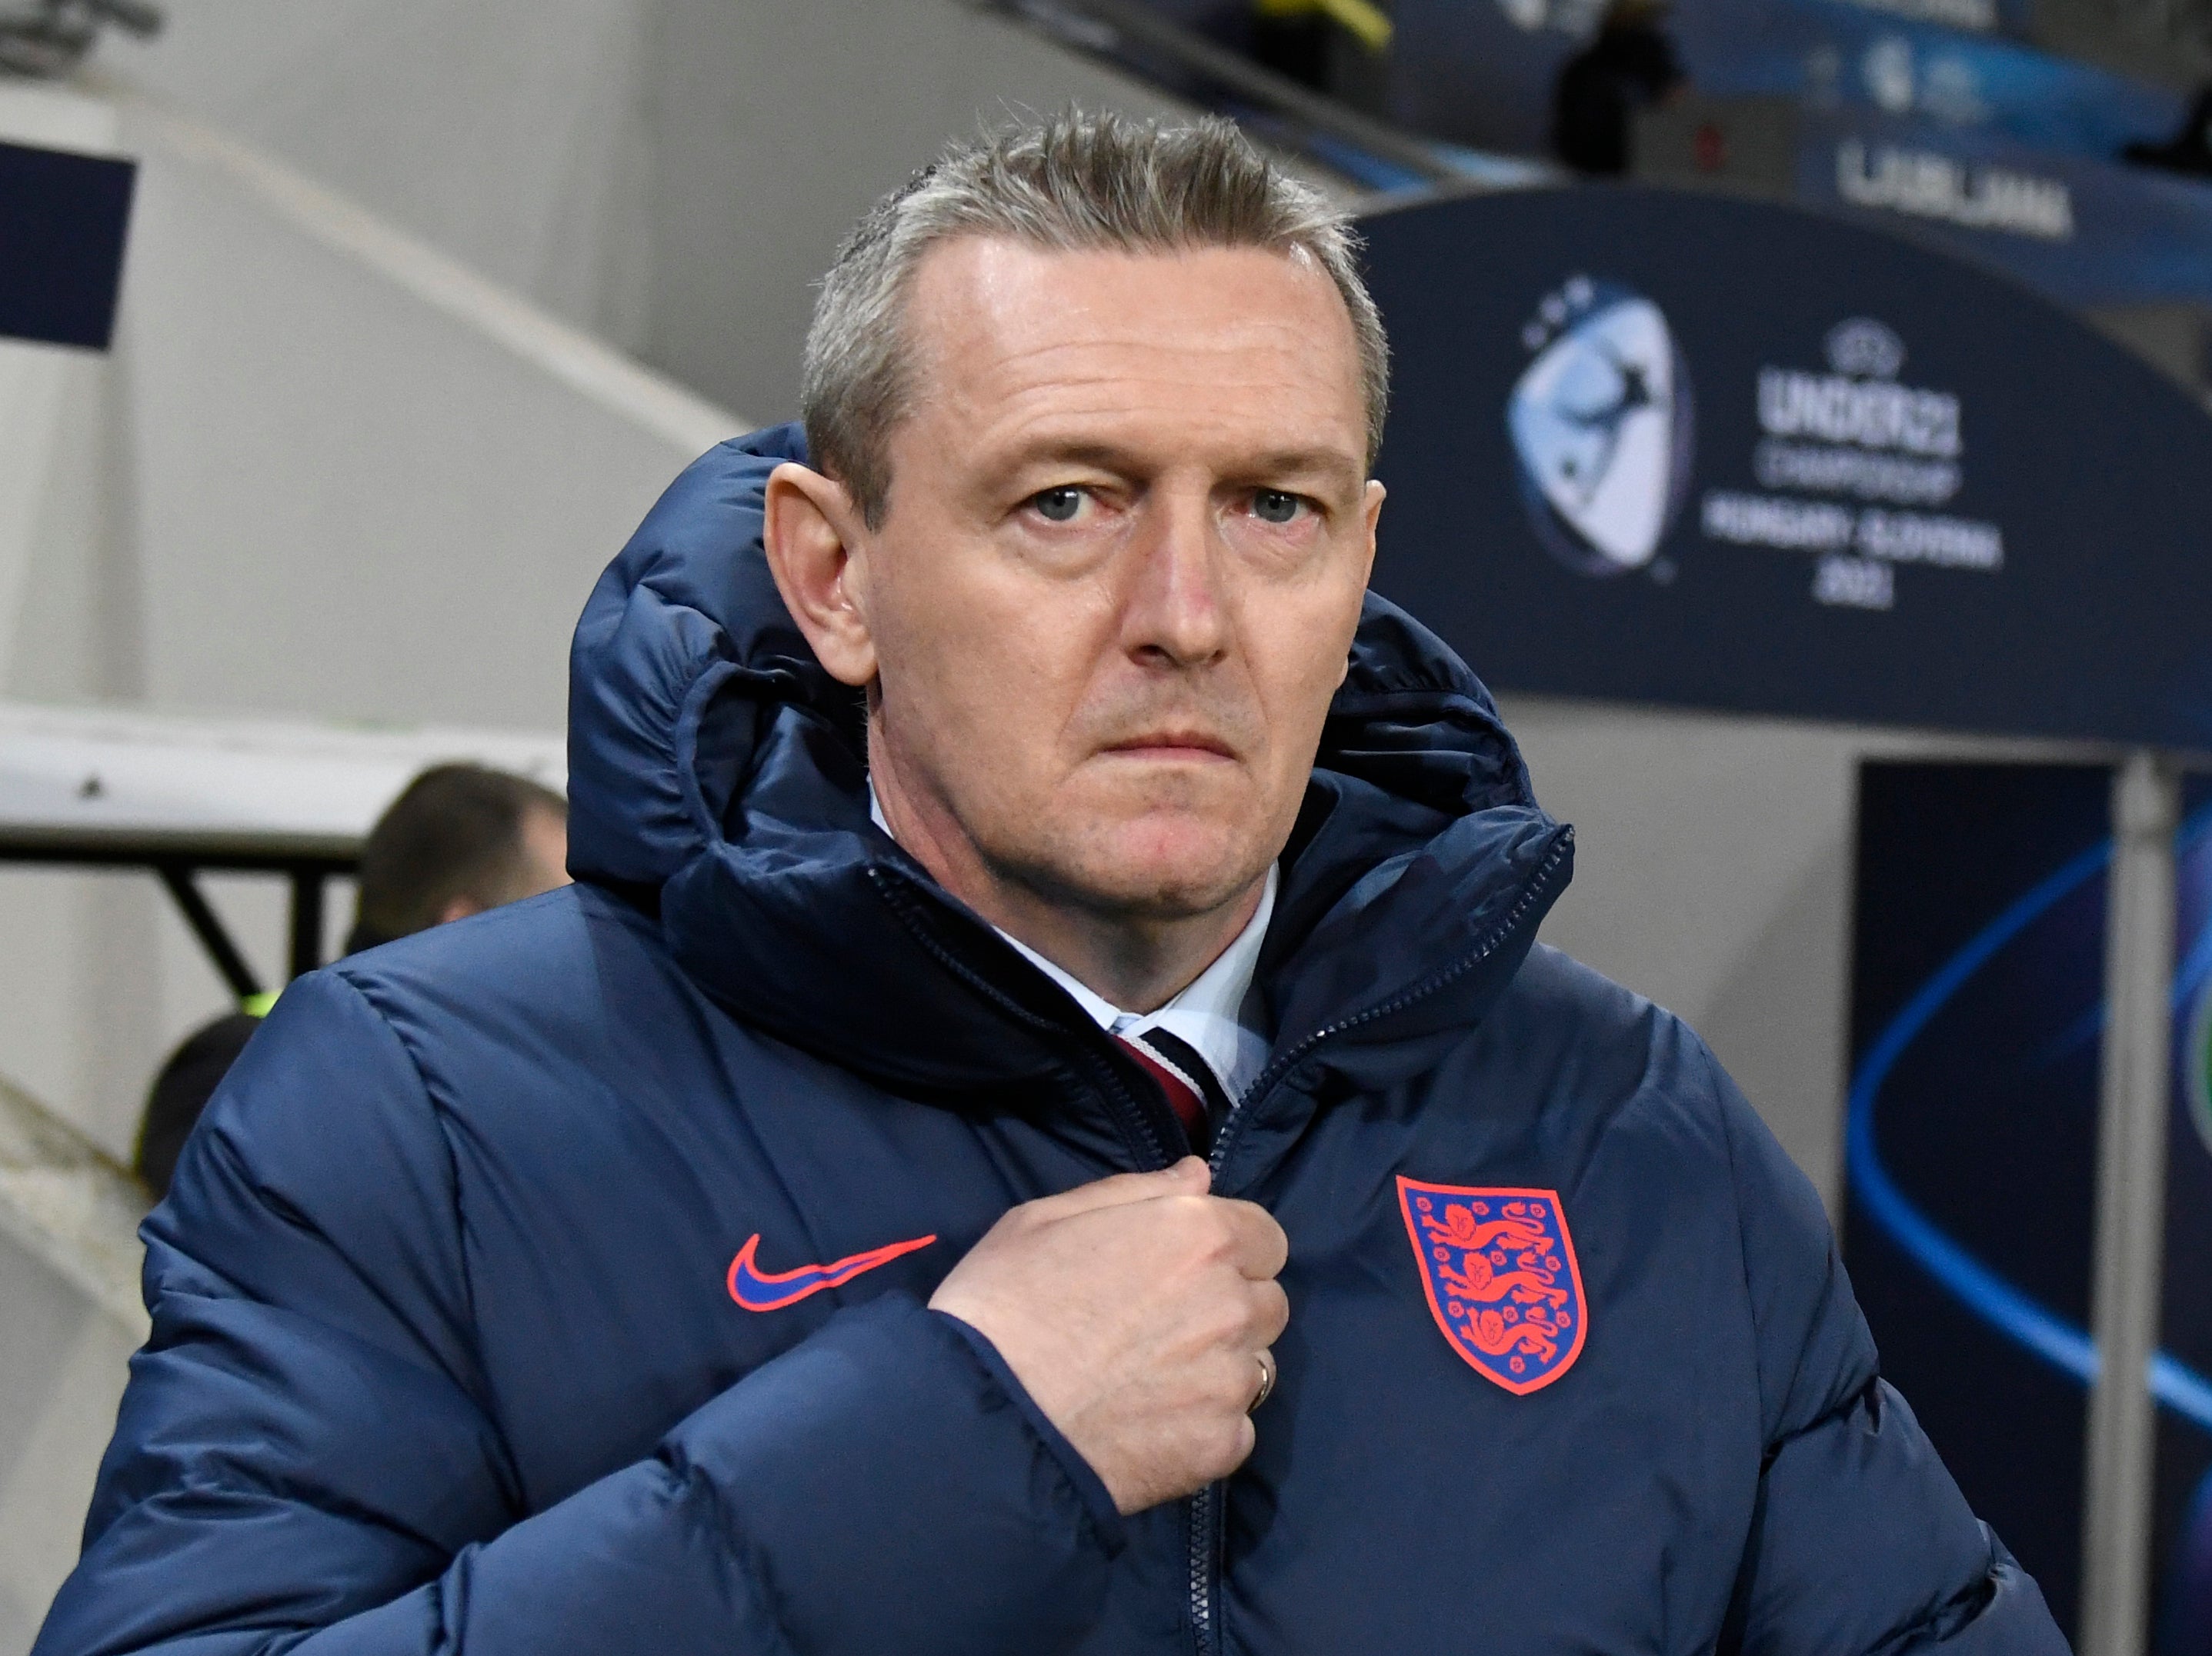 England U21 manager Aidy Boothroyd has complained about squad selection issues